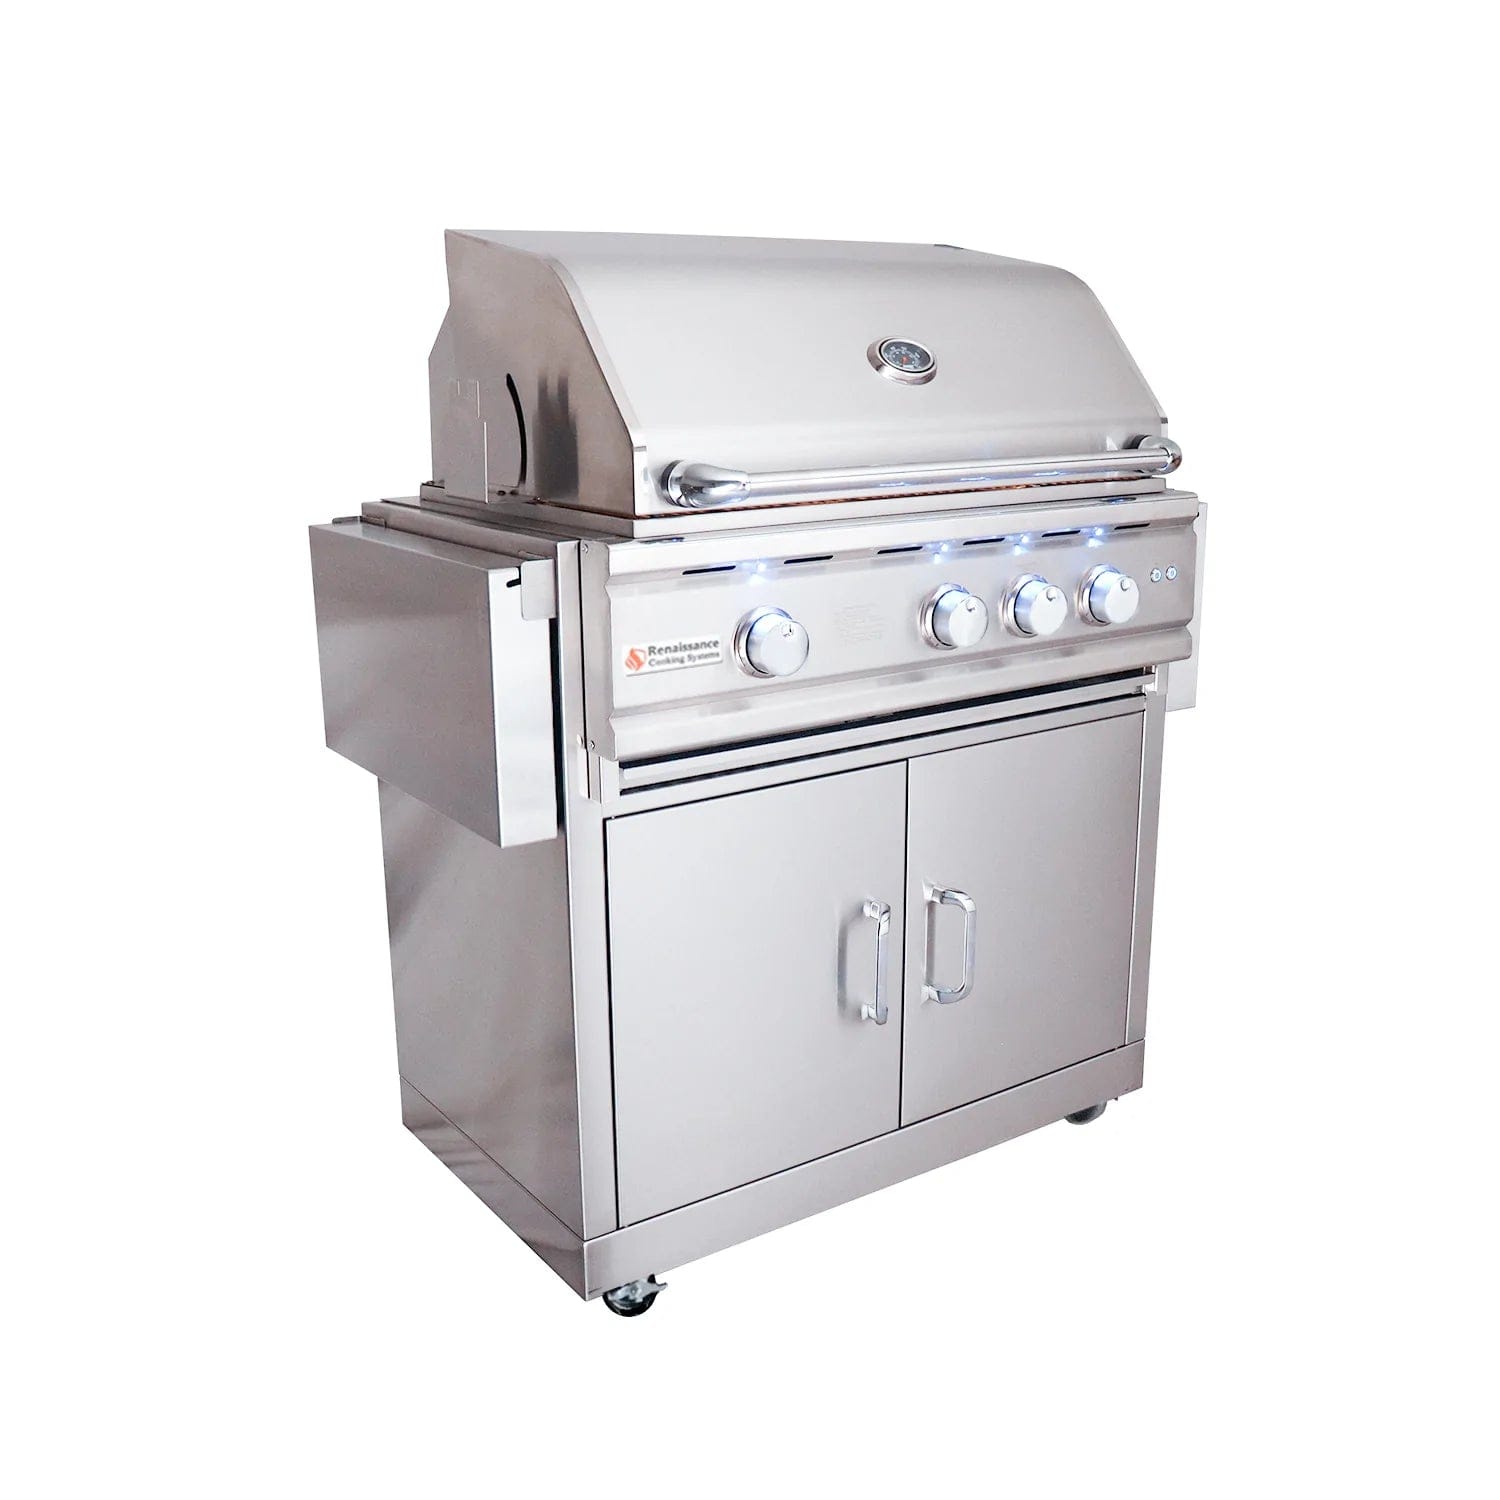 The Renaissance Cooking Systems - 30" Cutlass Pro Series Portable Grill - Kitchen King Direct